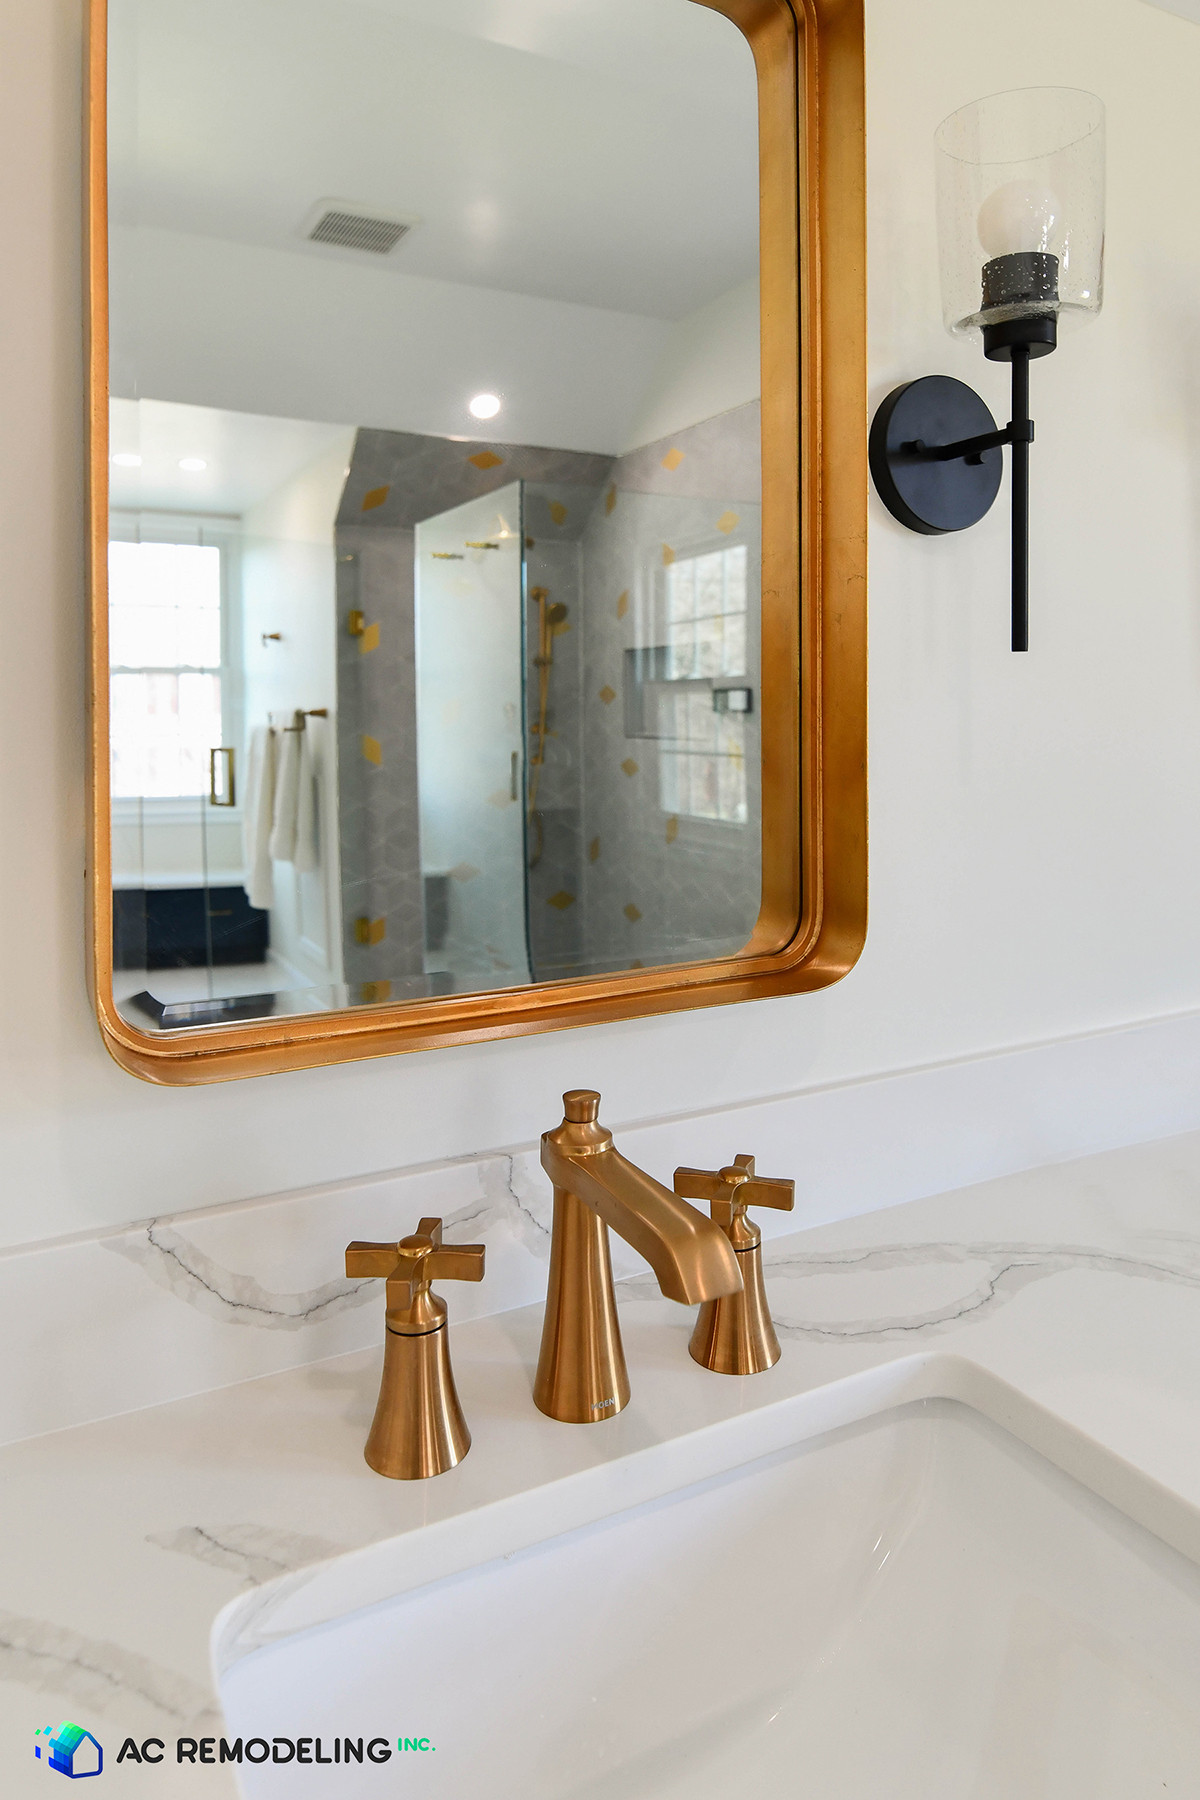 Antique gold mirror & 8" Widespread faucet in brushed gold.